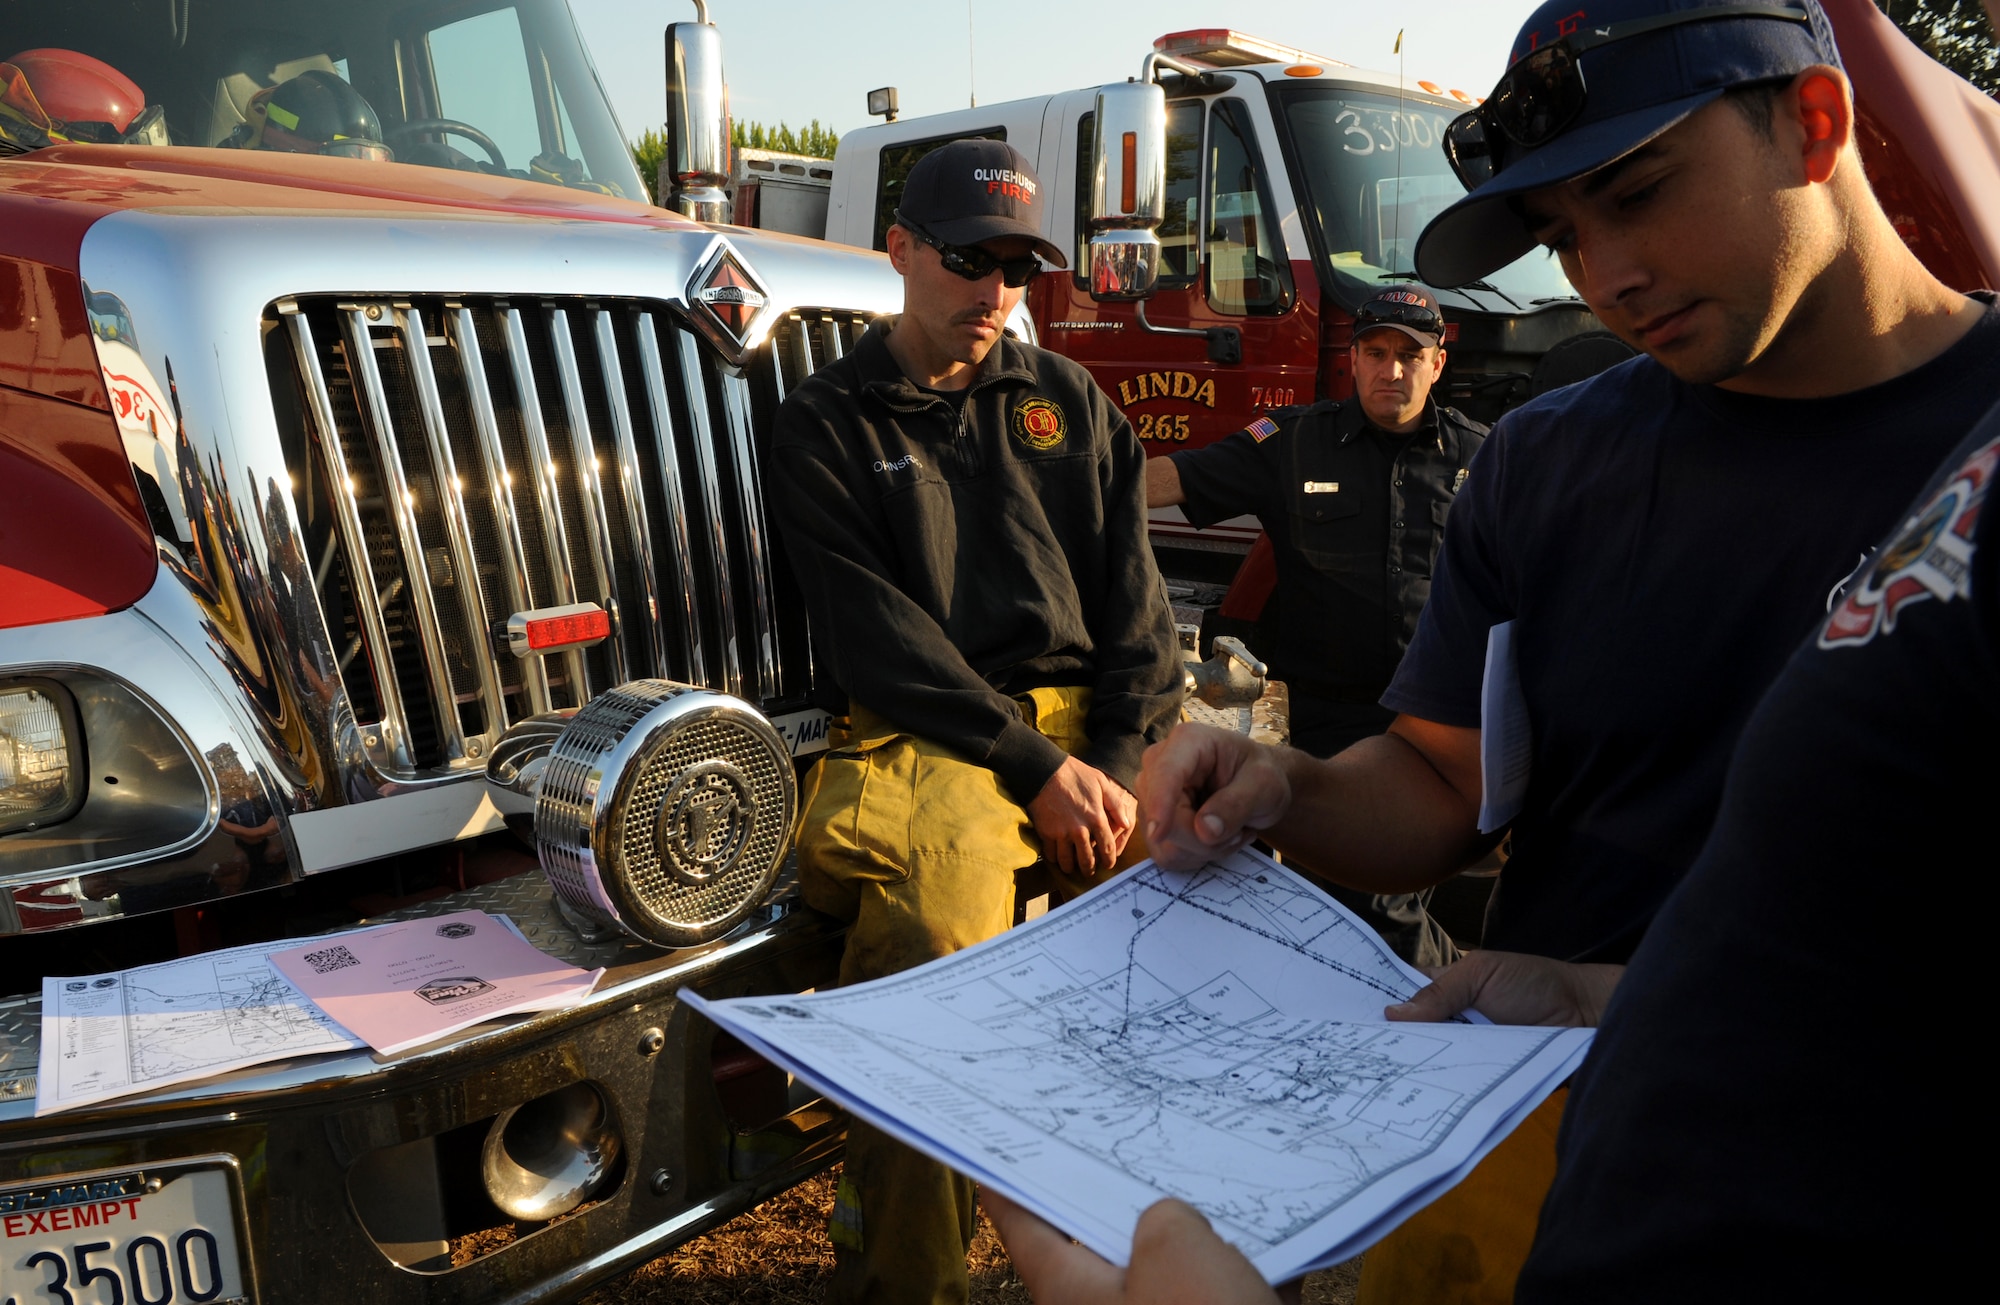 Steven Dobbs, 9th Civil Engineer Squadron fire captain, views a map of terrain near Clearlake, California to help combat a wildfire, Aug. 6, 2015, in Lakeport, California. The Rocky Wildfire has consumed nearly 70,000 acres in Northern California. (U.S. Air Force Photo by Airman Preston L. Cherry)